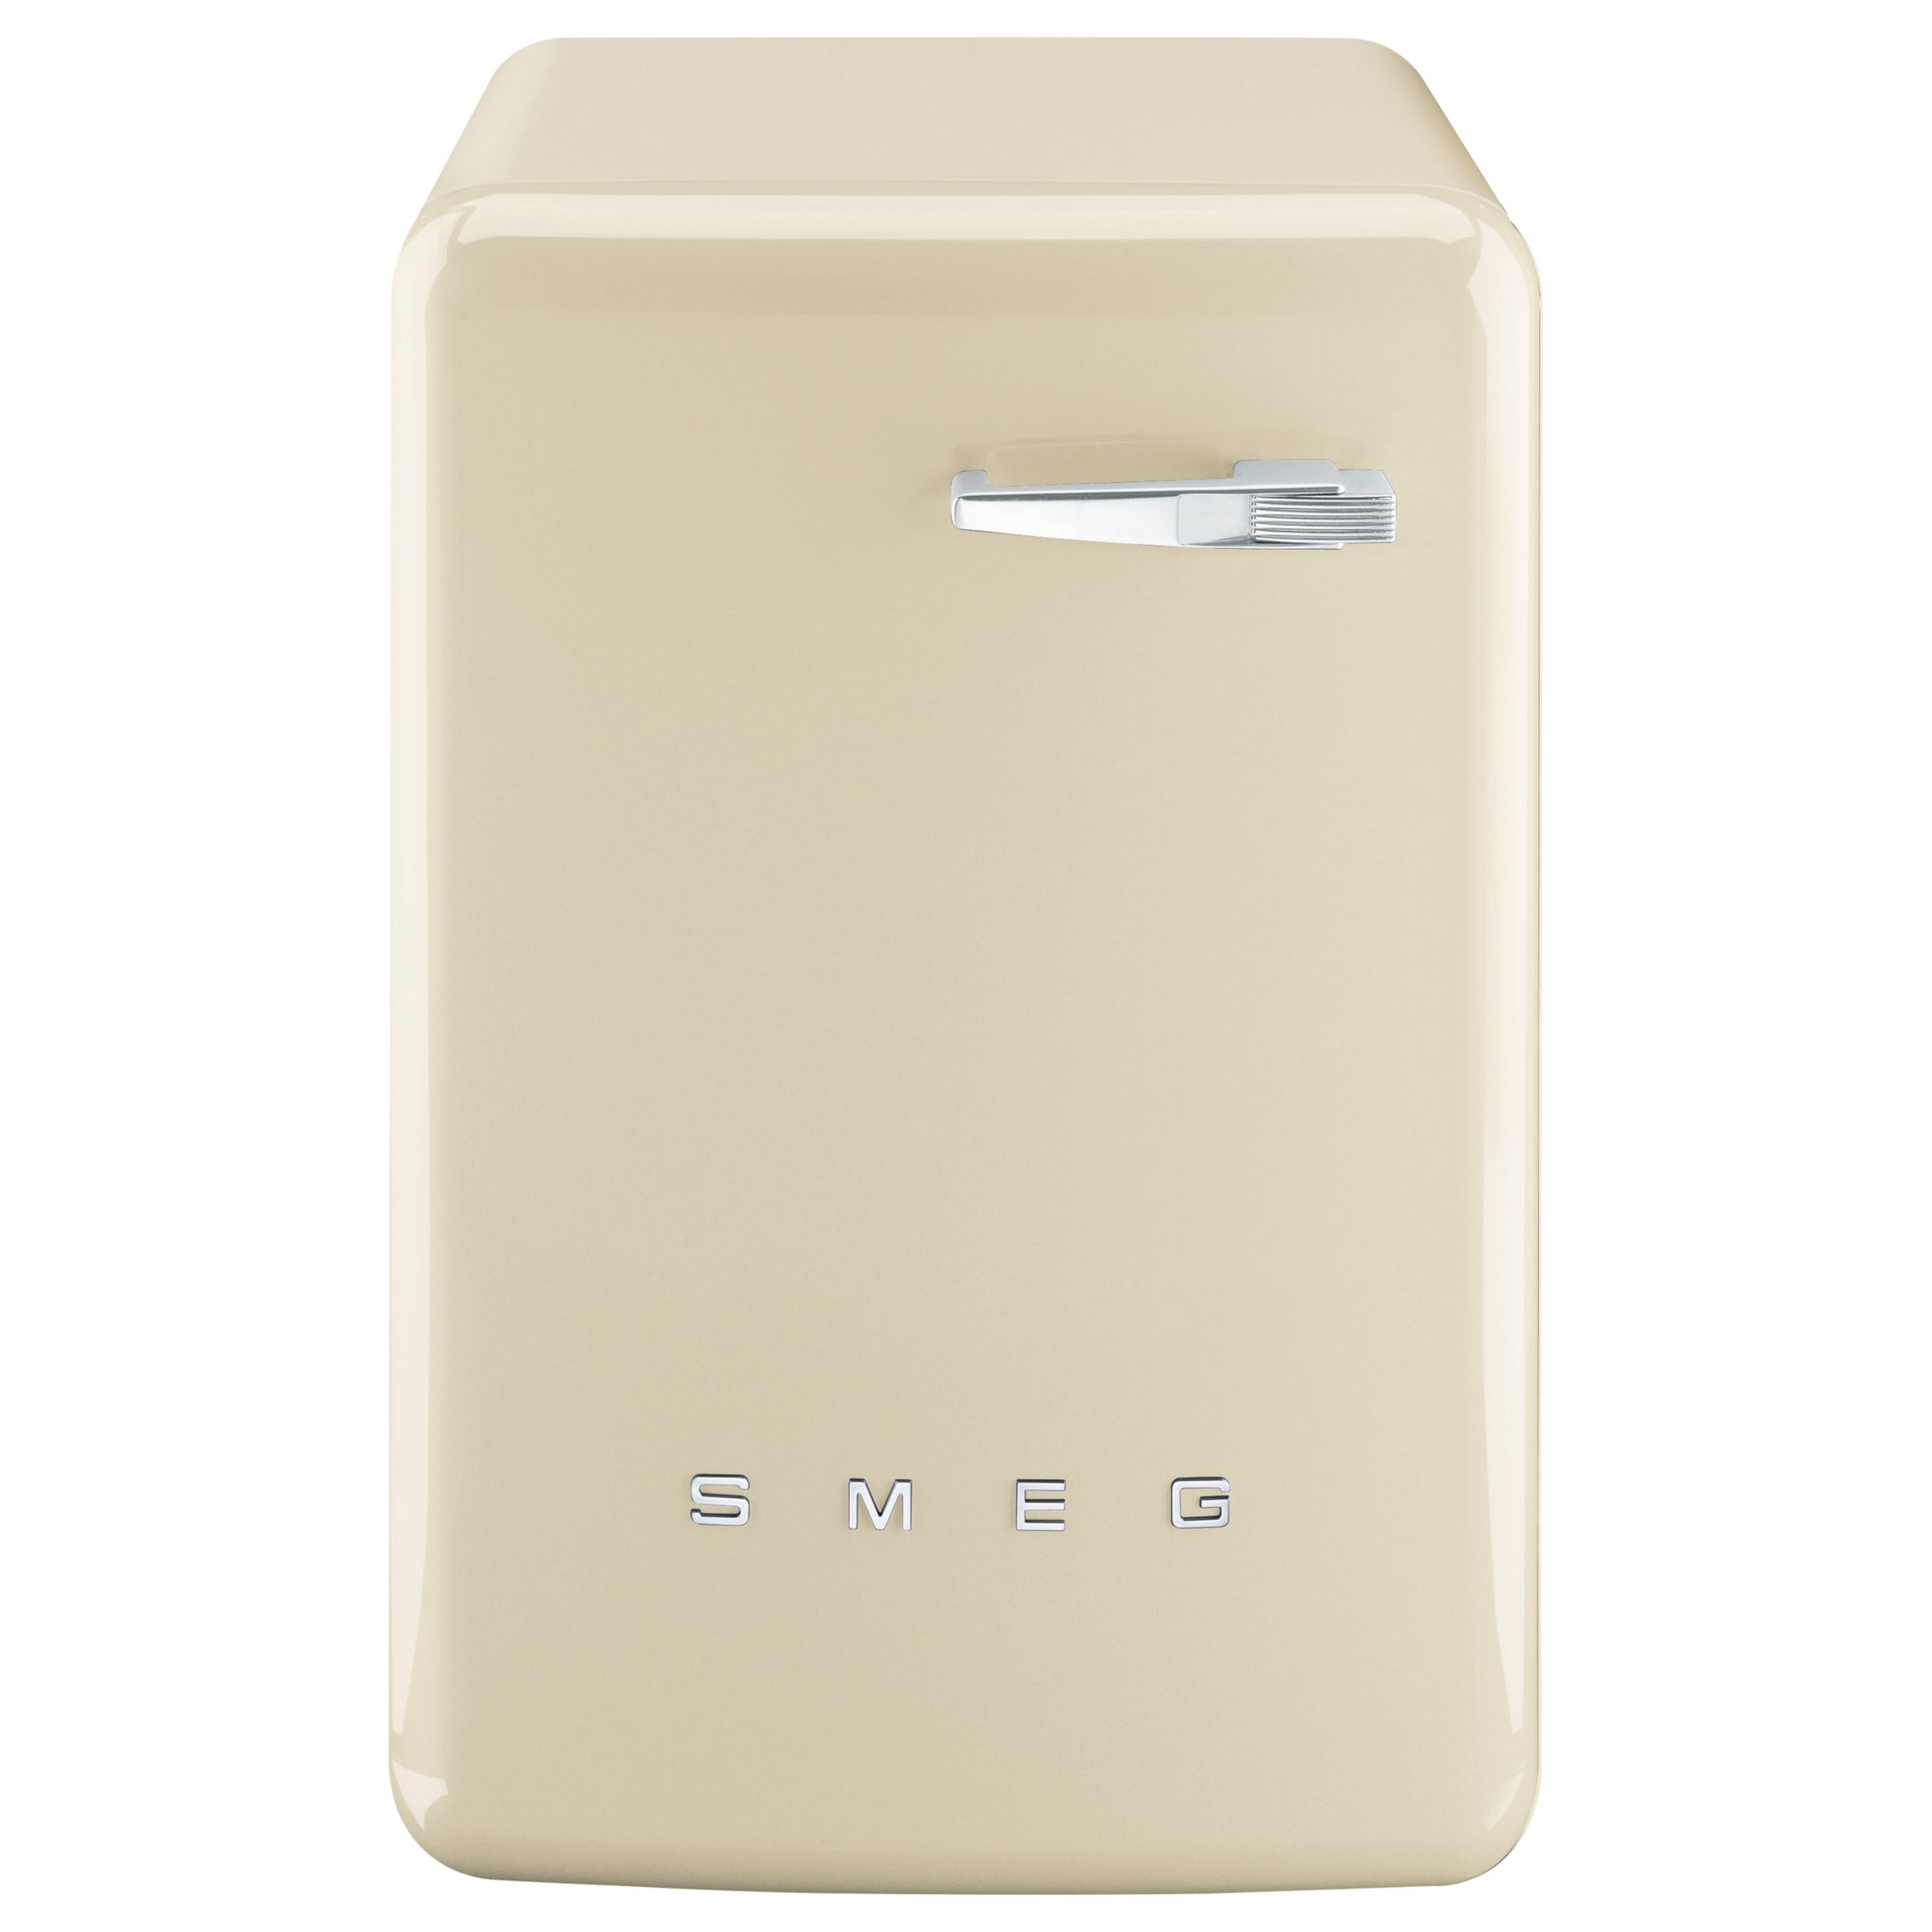 Smeg Freestanding Washing Machine, 7kg Load, A++ Energy Rating, 1400rpm Spin